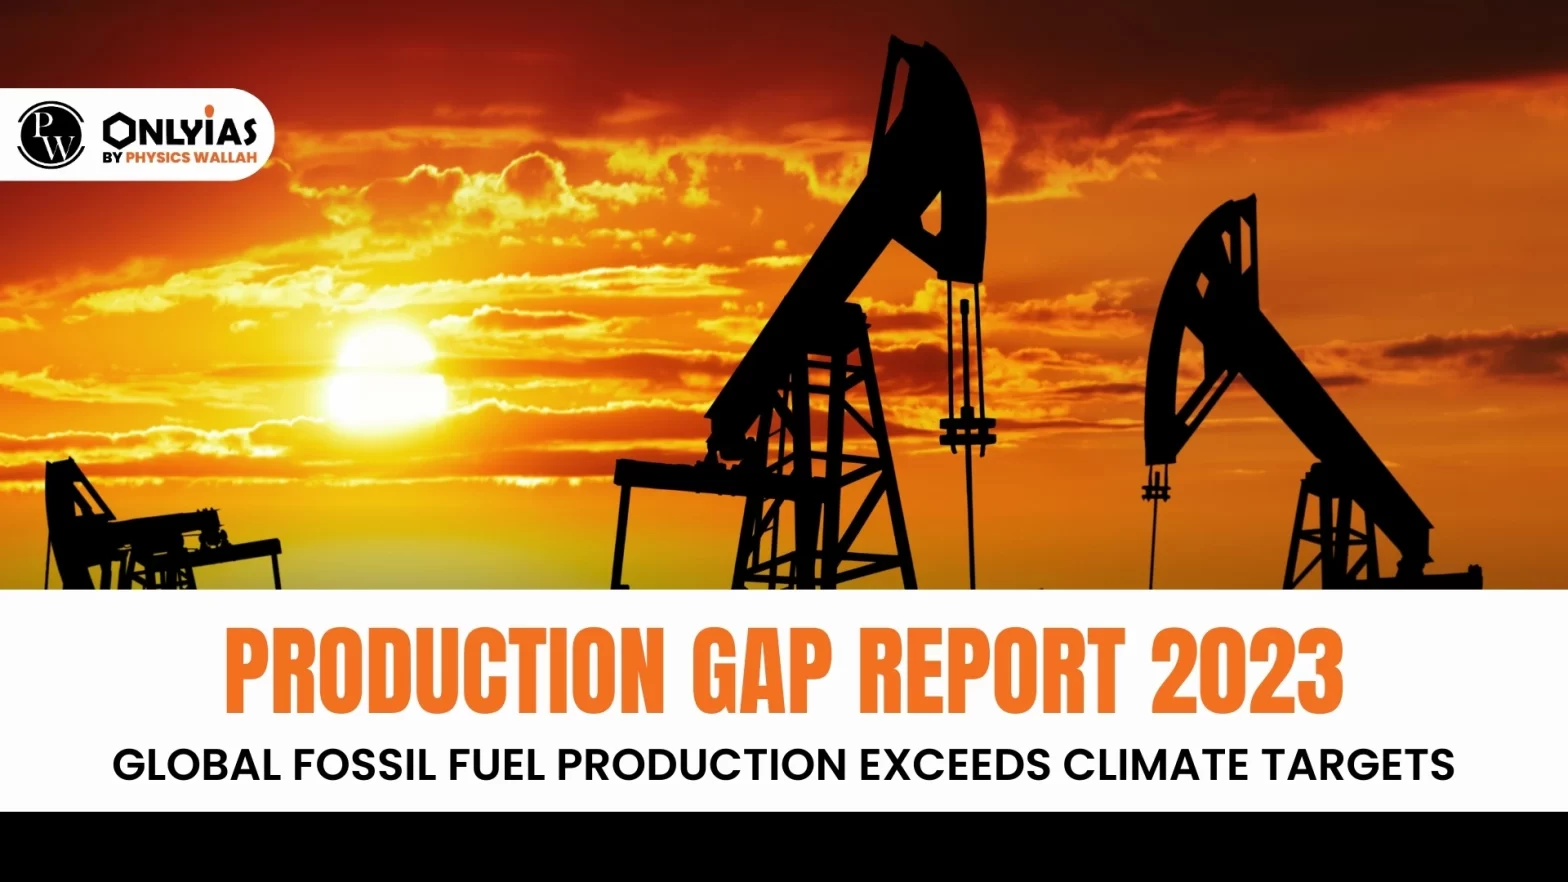 Production Gap Report 2023: Global Fossil Fuel Production Exceeds Climate Targets